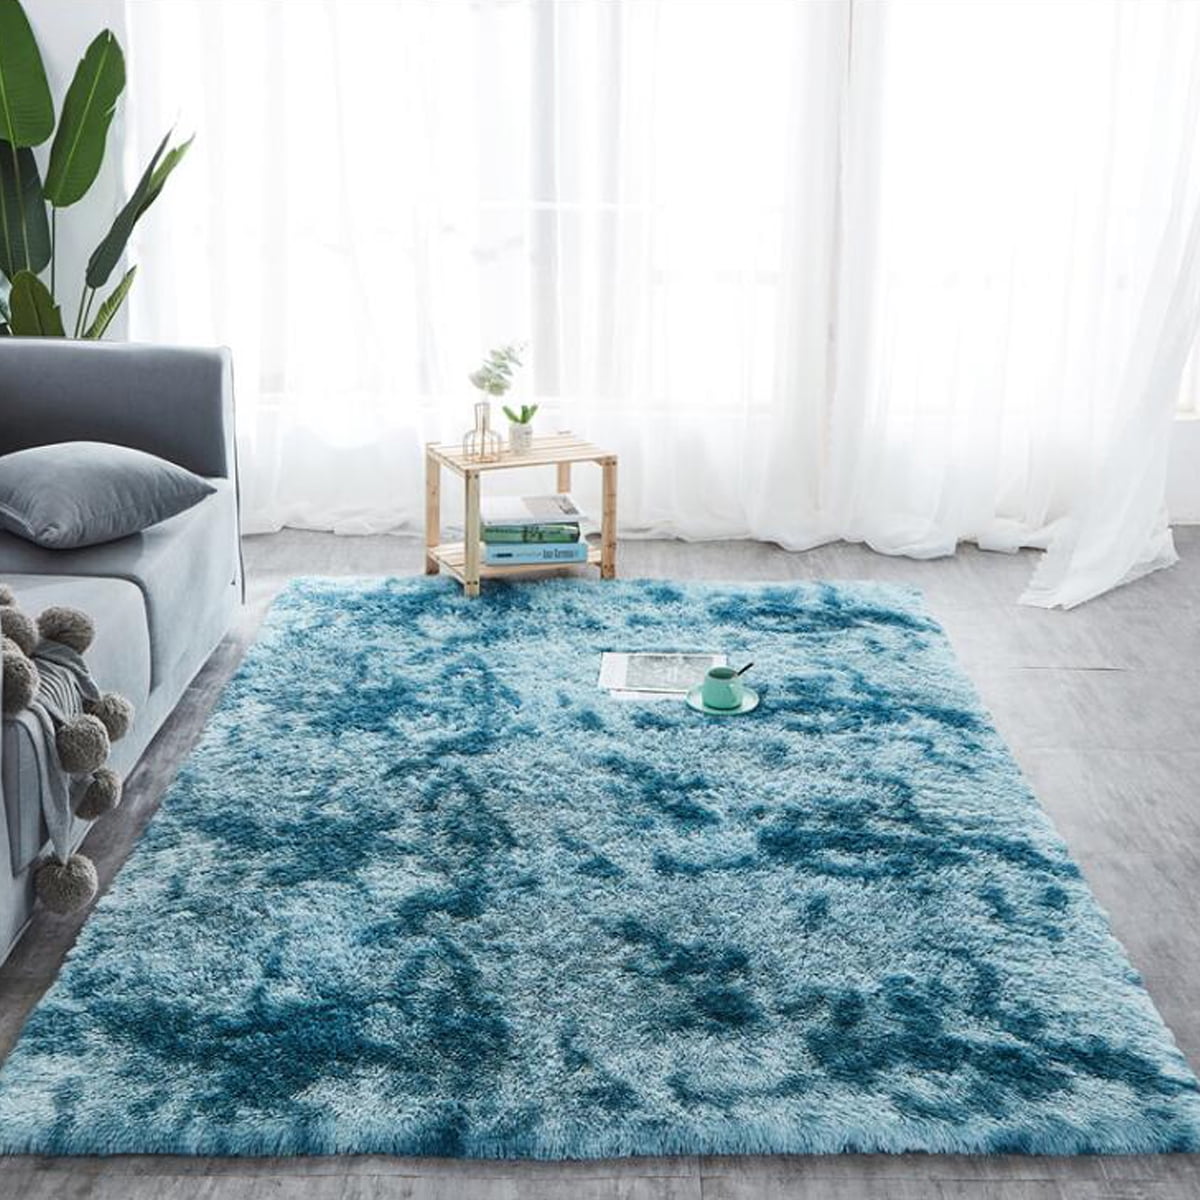 Teal Blue Shaggy Rugs Large/Round/Runner Hallway Bedroom Non Shed Fluffy Mats UK 